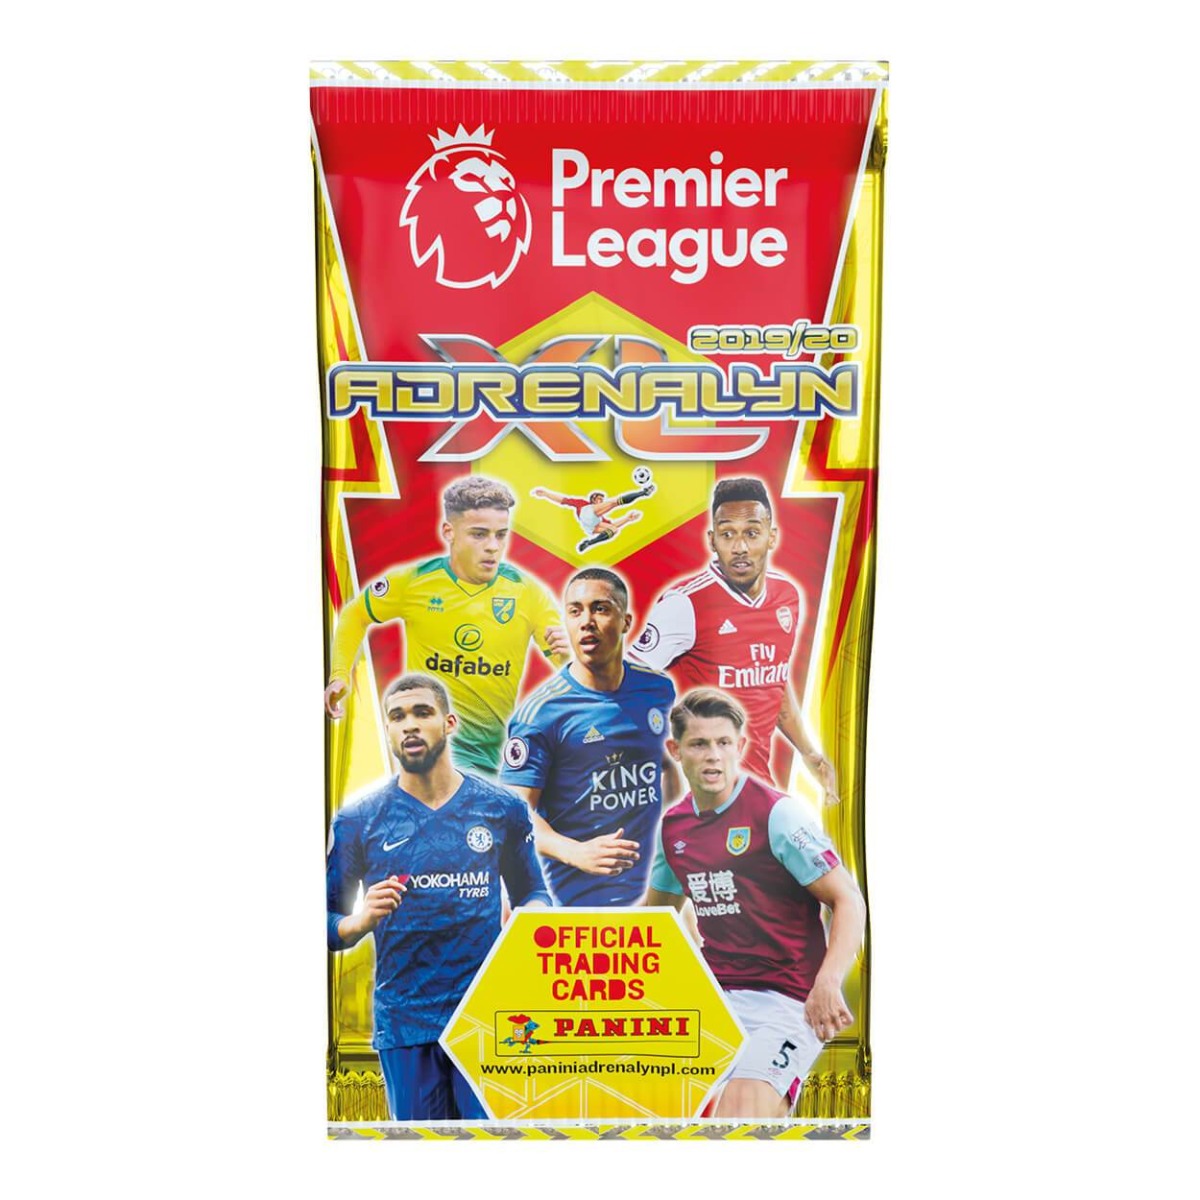 Panini 2019-20 Premier League Trading Card Pack (6 Cards Per Pack)